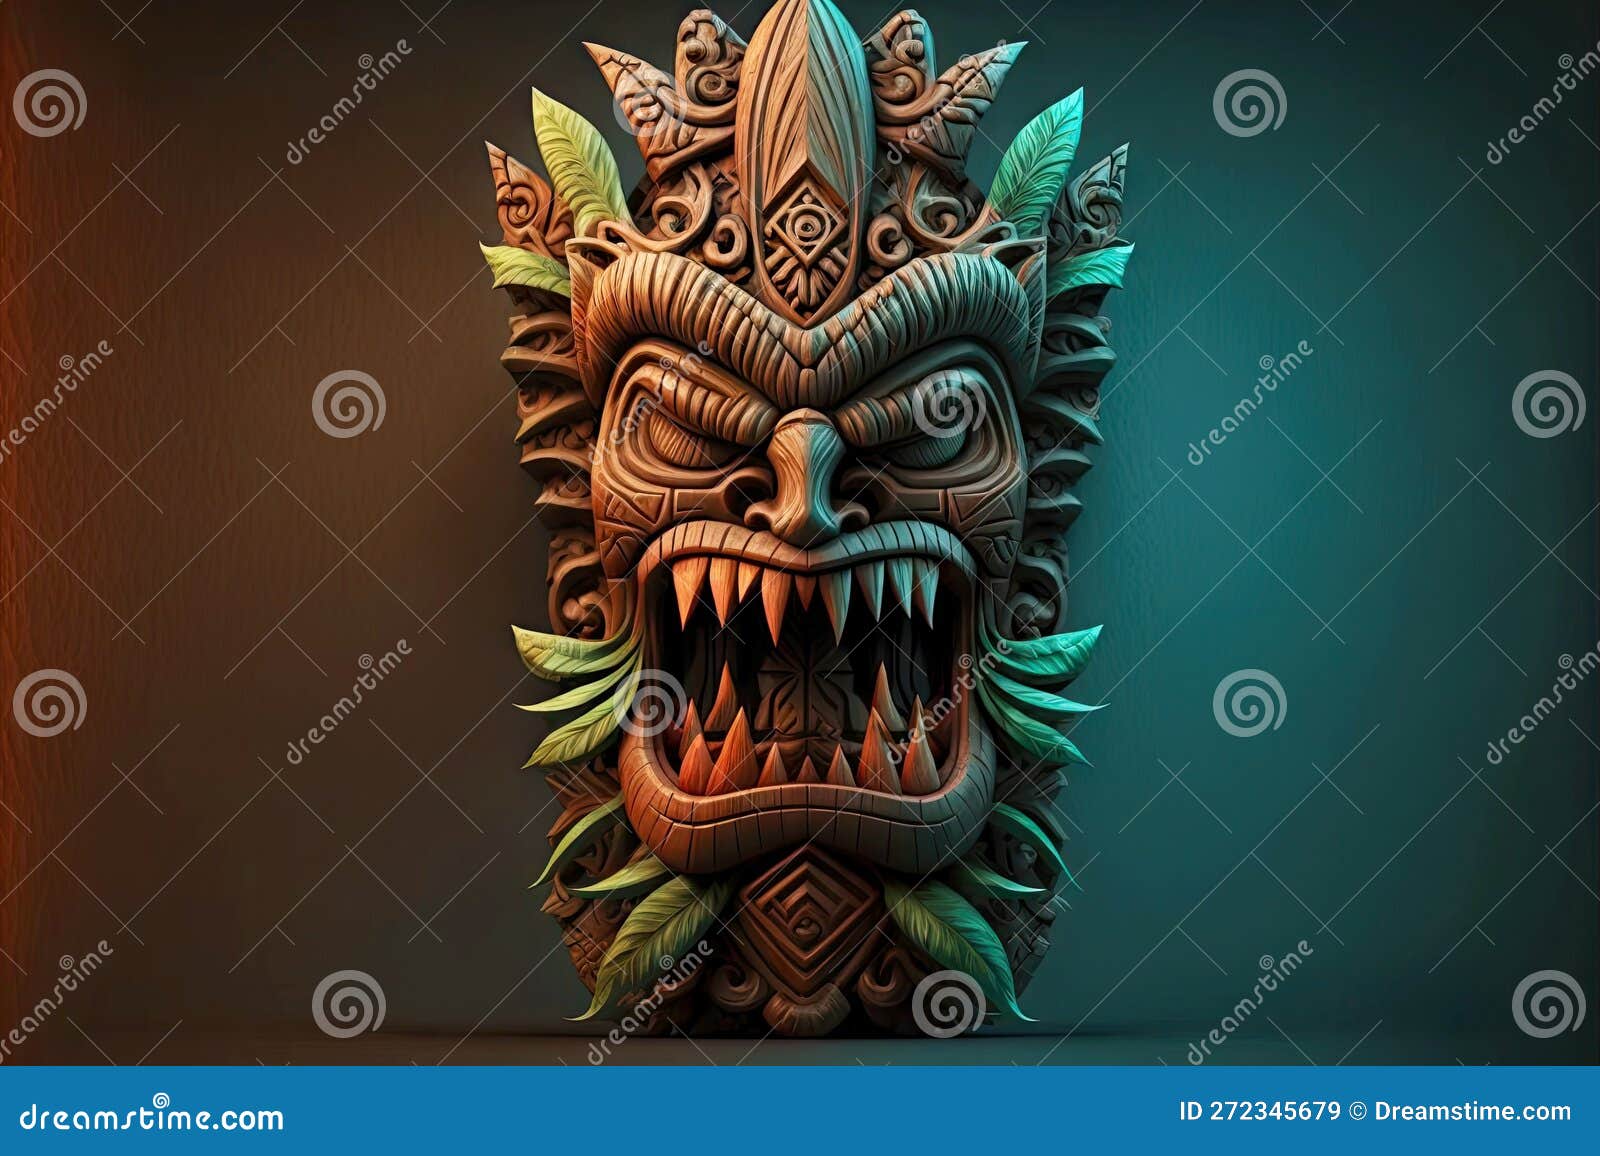 Ancient Wooden Tiki Mask With Teeth Of Exotic Tribes Stock Image 